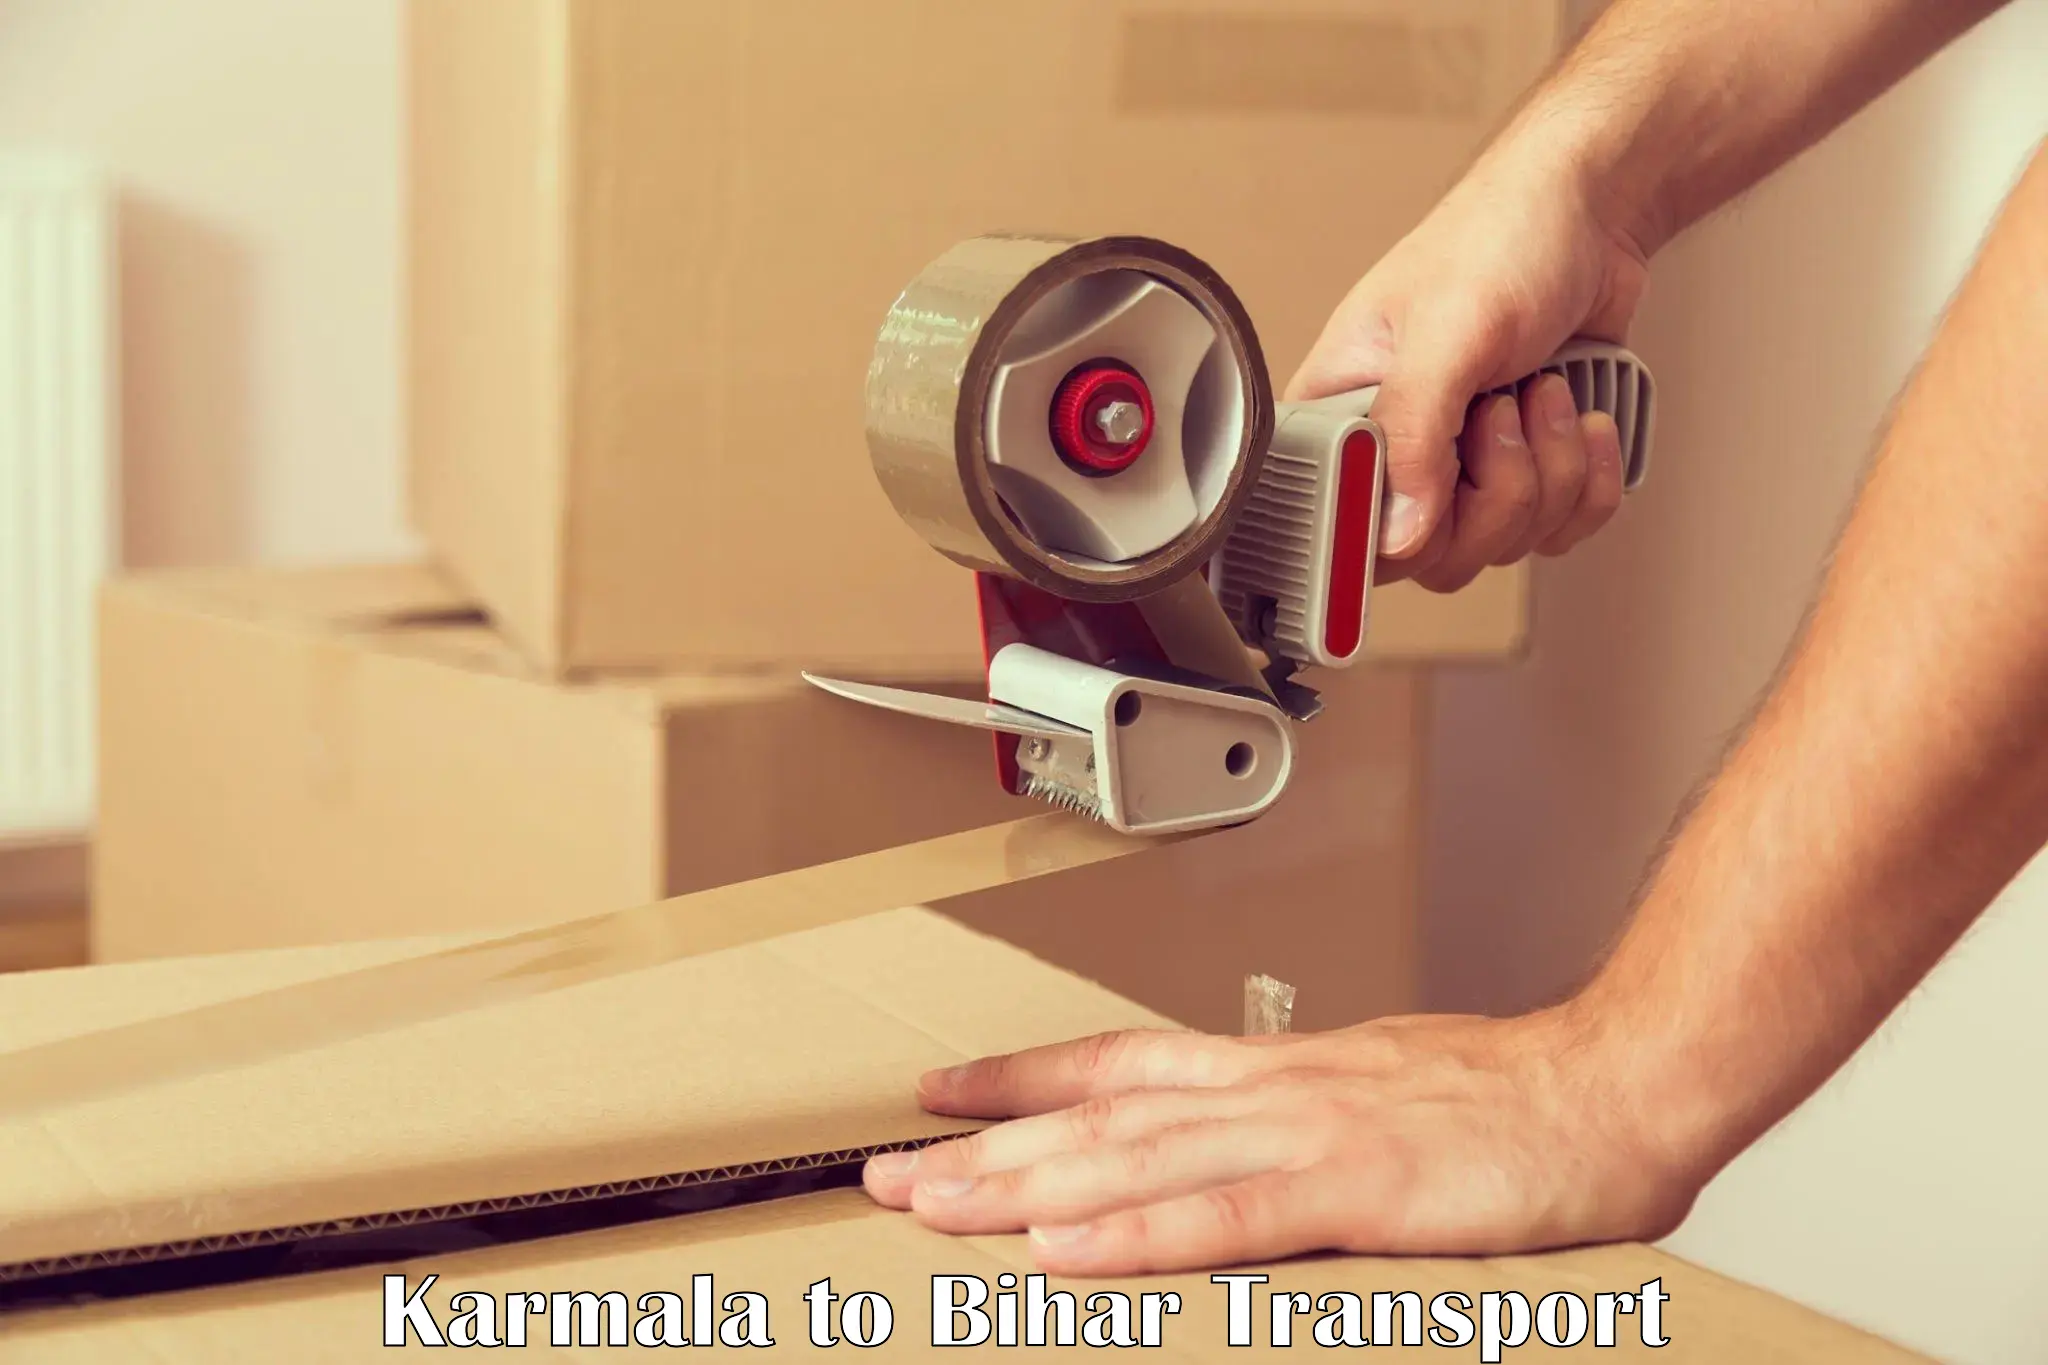 Domestic transport services Karmala to Fatwah